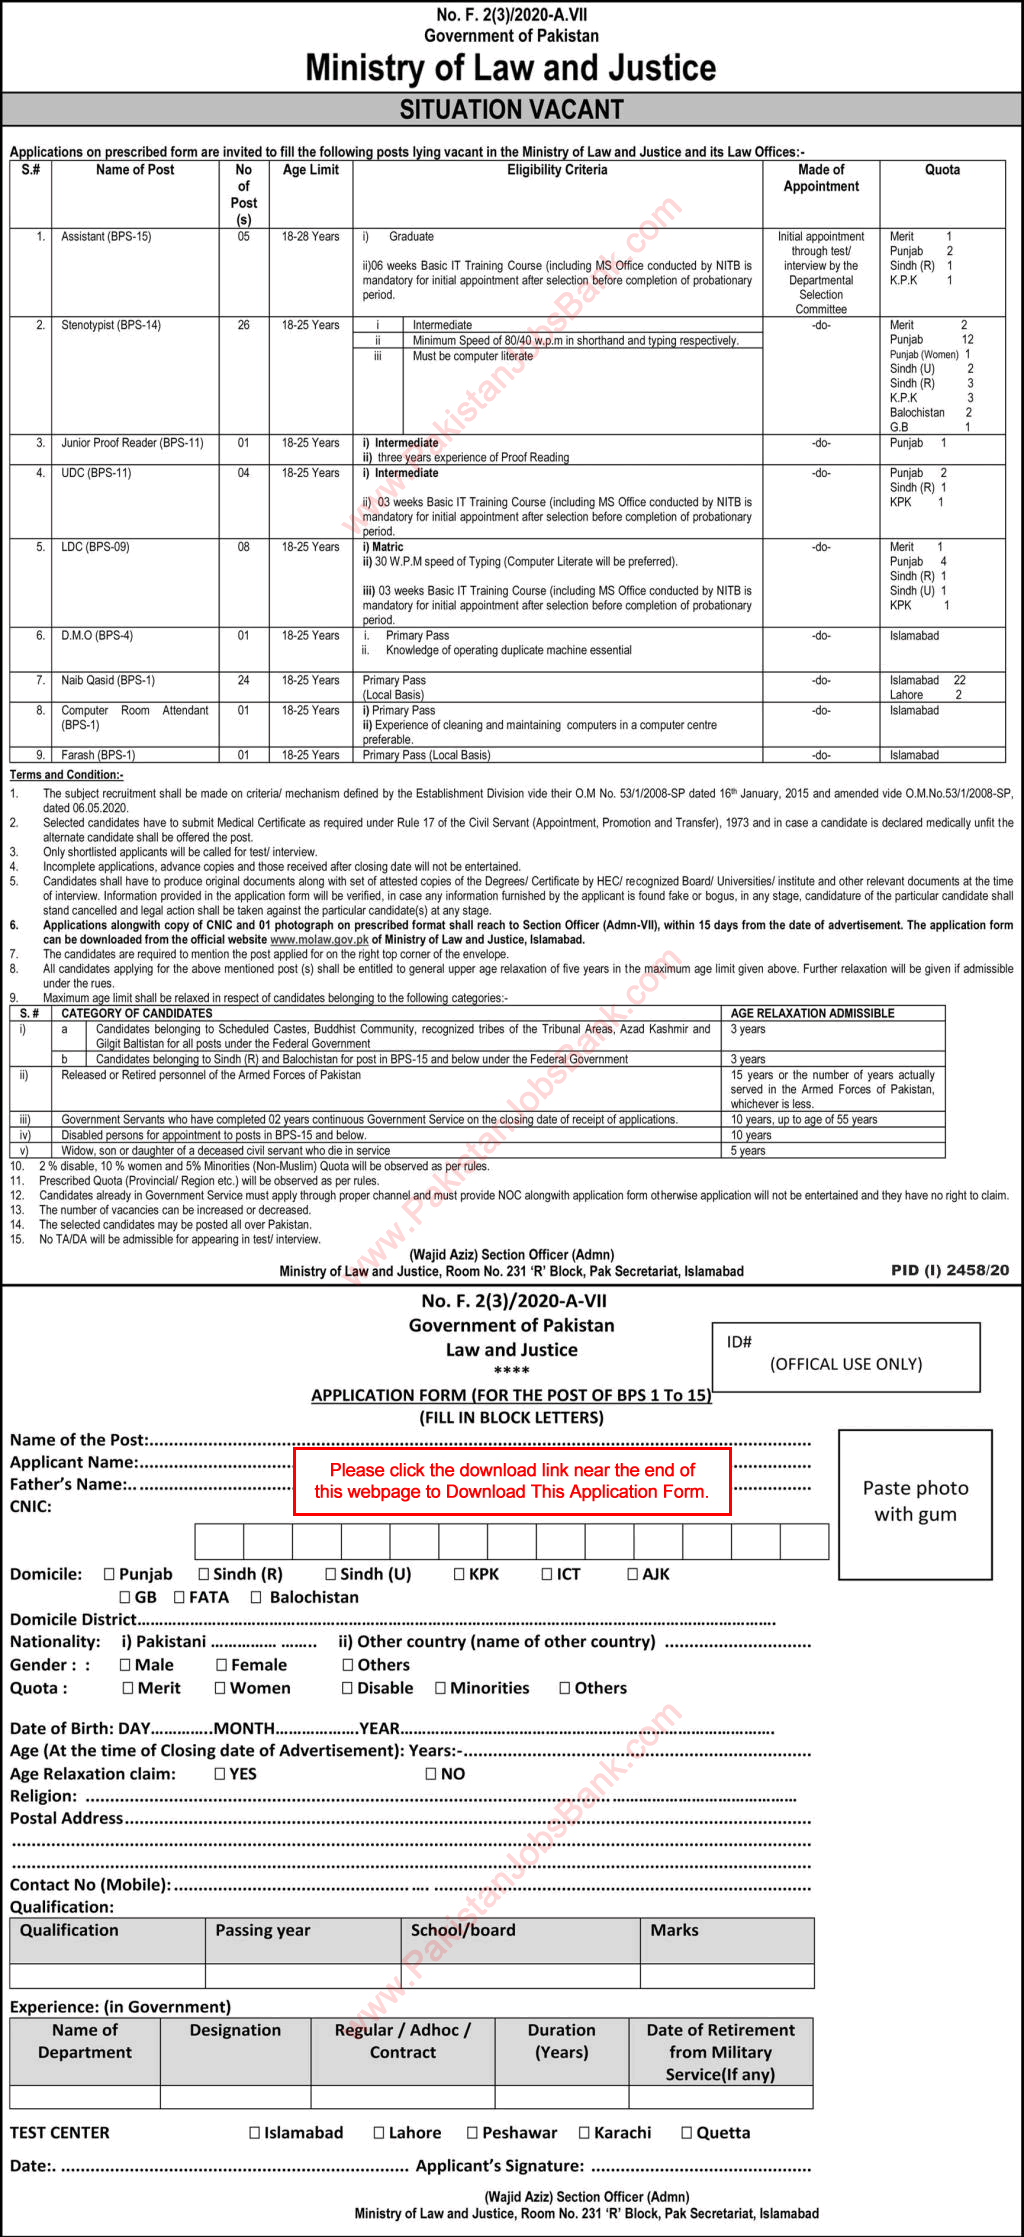 Ministry of Law and Justice Jobs November 2020 Application Form Stenotypists, Naib Qasid & Others Latest